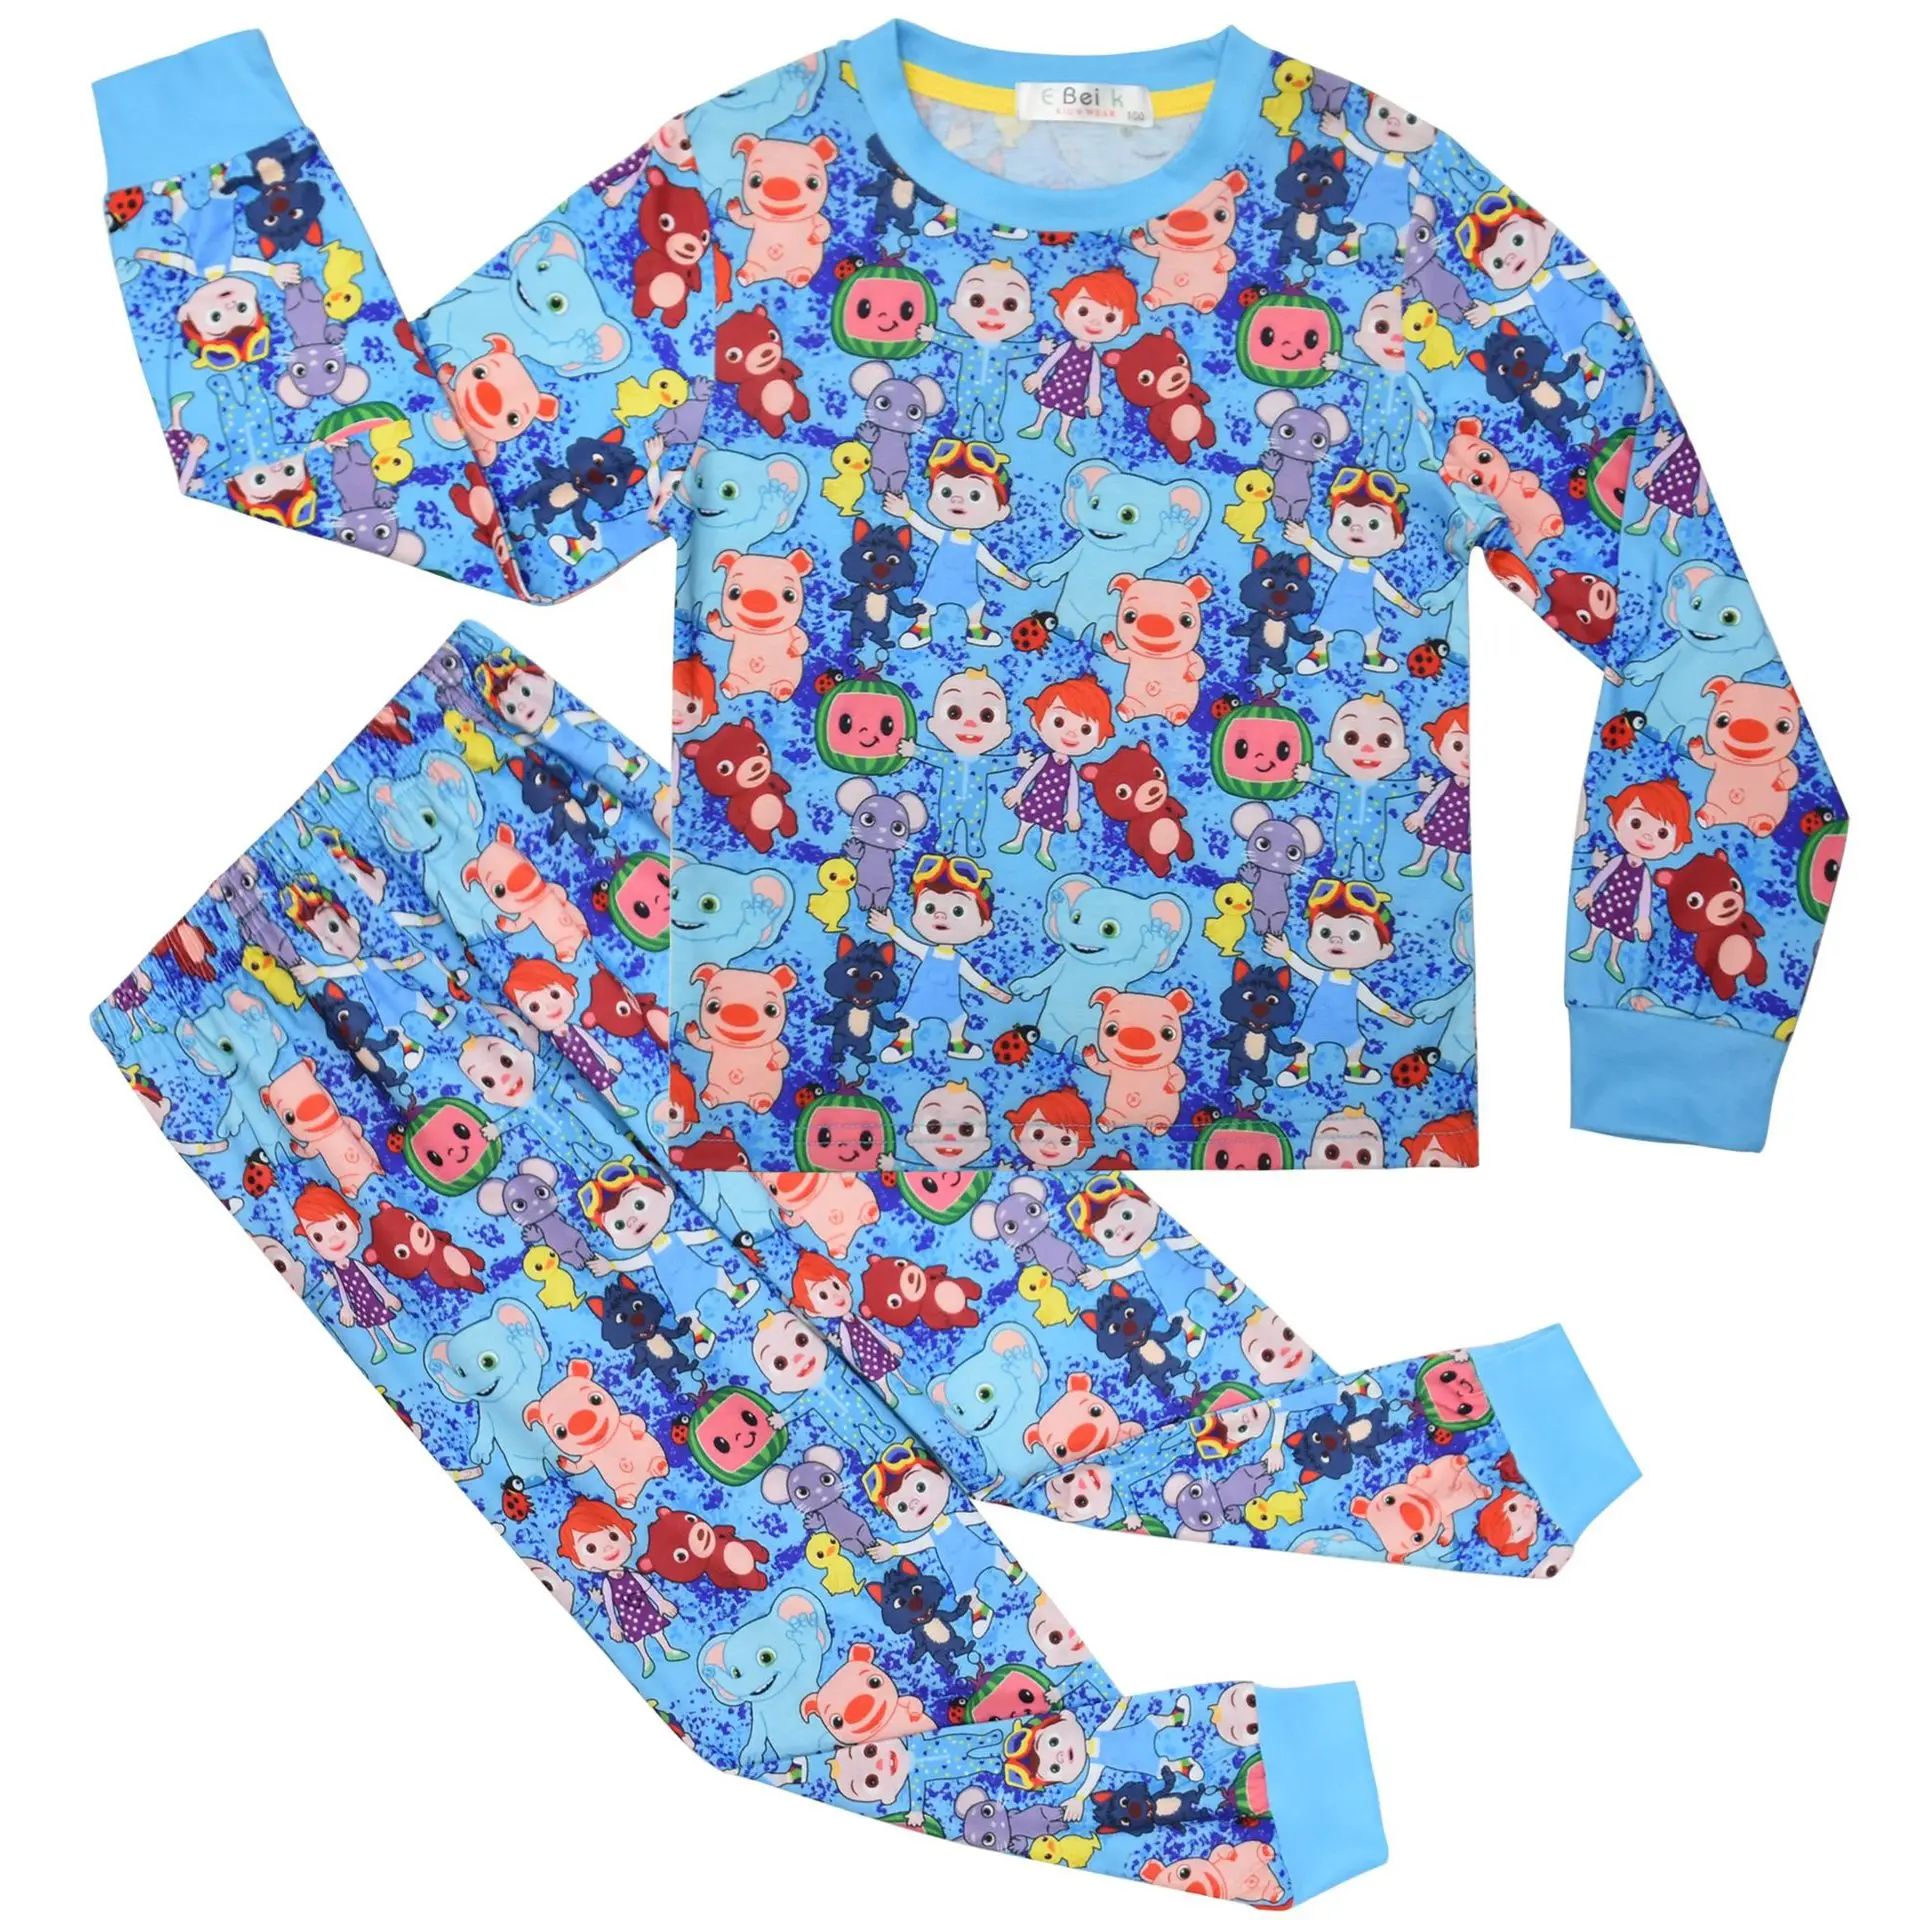 

2021 Fancy CocoMelon Children Homewear Pajamas Long-sleeve 2pcs Suit Toddler Kids Boutique Clothing Boys Girls Casual Outfits